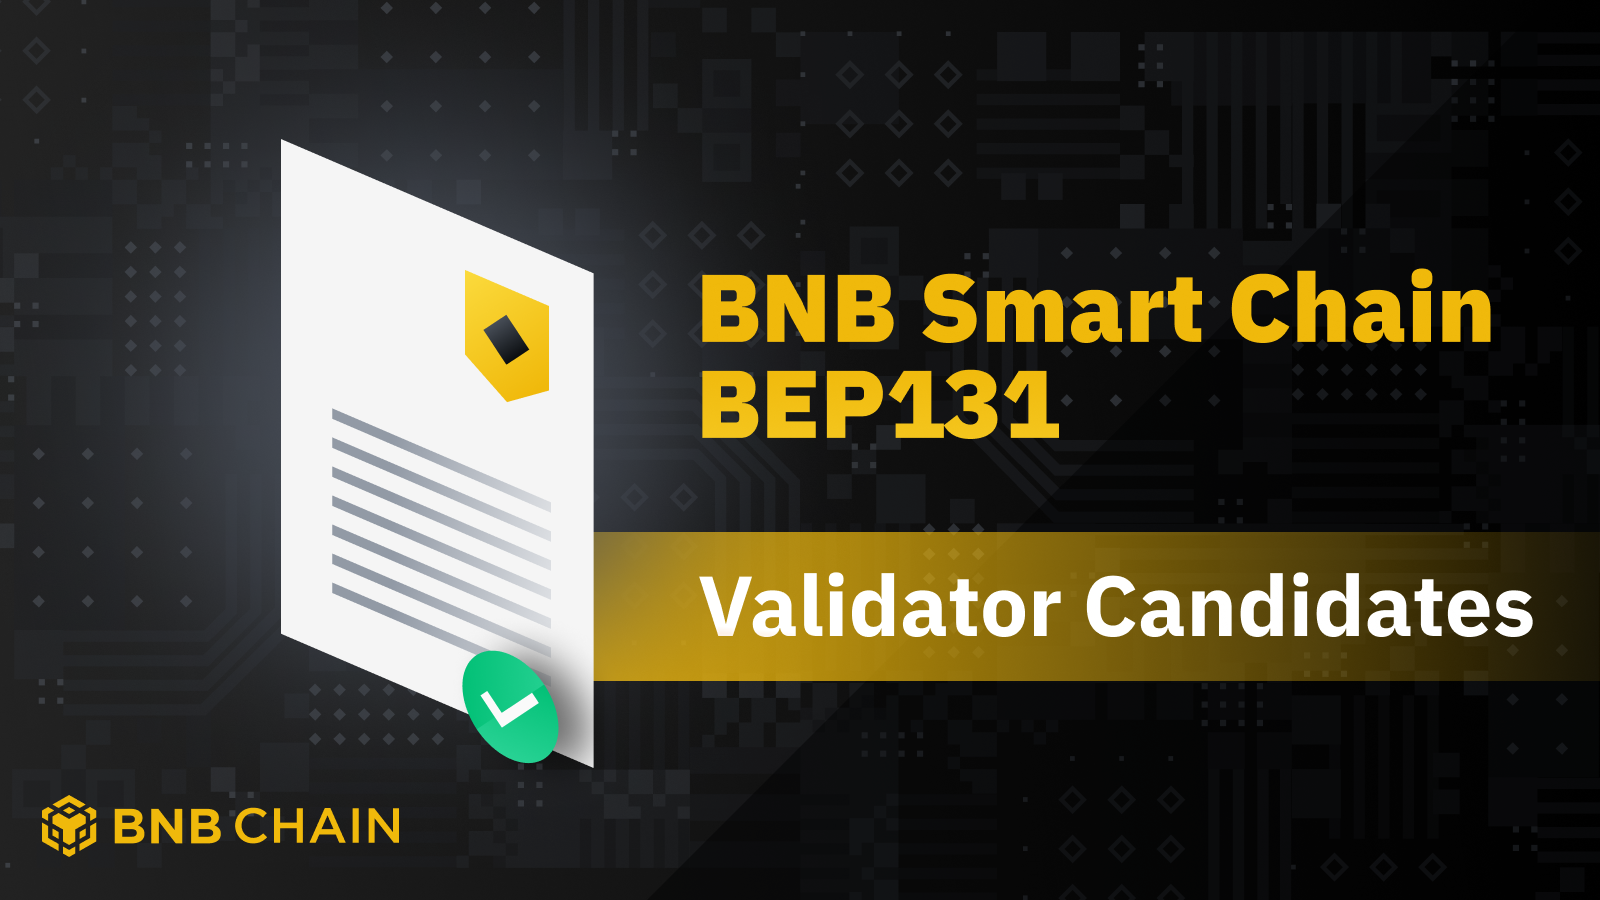 BEP131: Introducing Candidate Validators Onto BNB Smart Chain